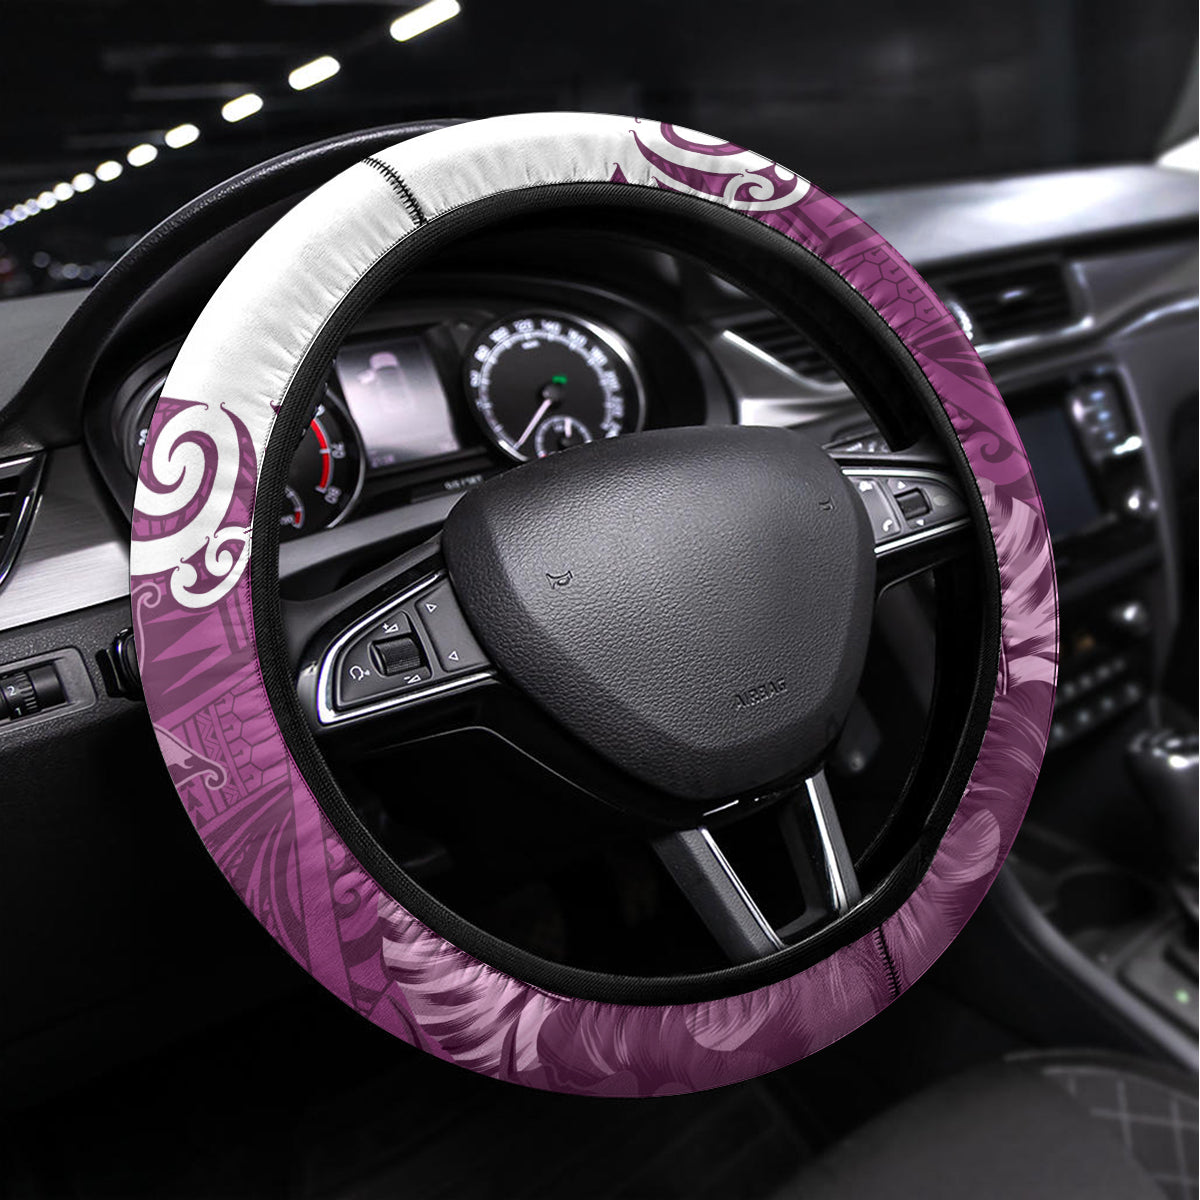 Custom New Zealand Womens Day Steering Wheel Cover Traditional Maori Woman Polynesian Pattern Pink Color LT03 Universal Fit Pink - Polynesian Pride